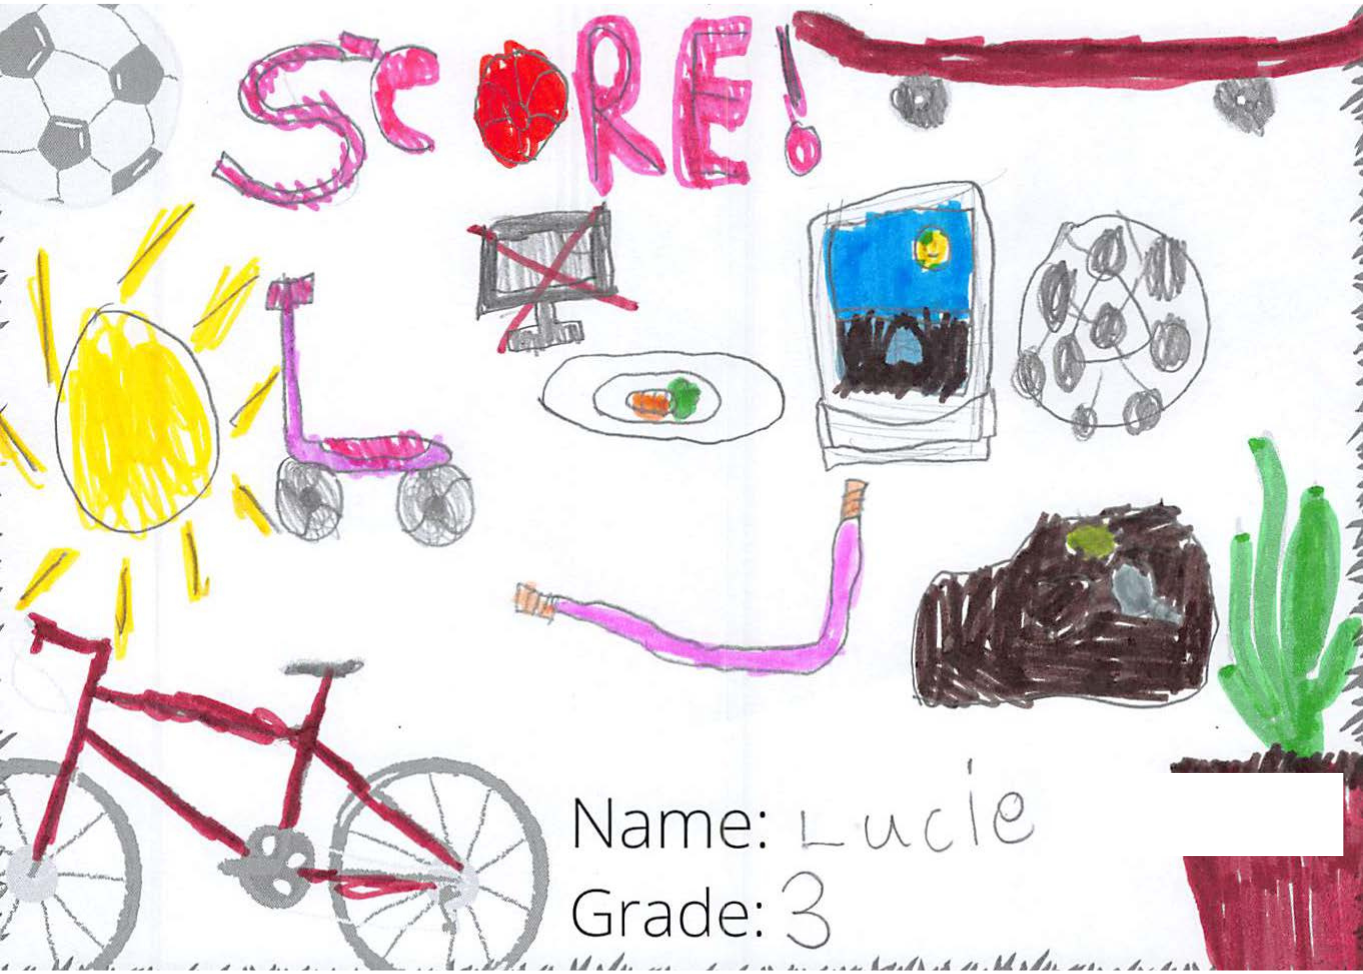 Marker drawing for the SCORE! logo contest. The drawing includes the sun, sports, vegetables, and more.